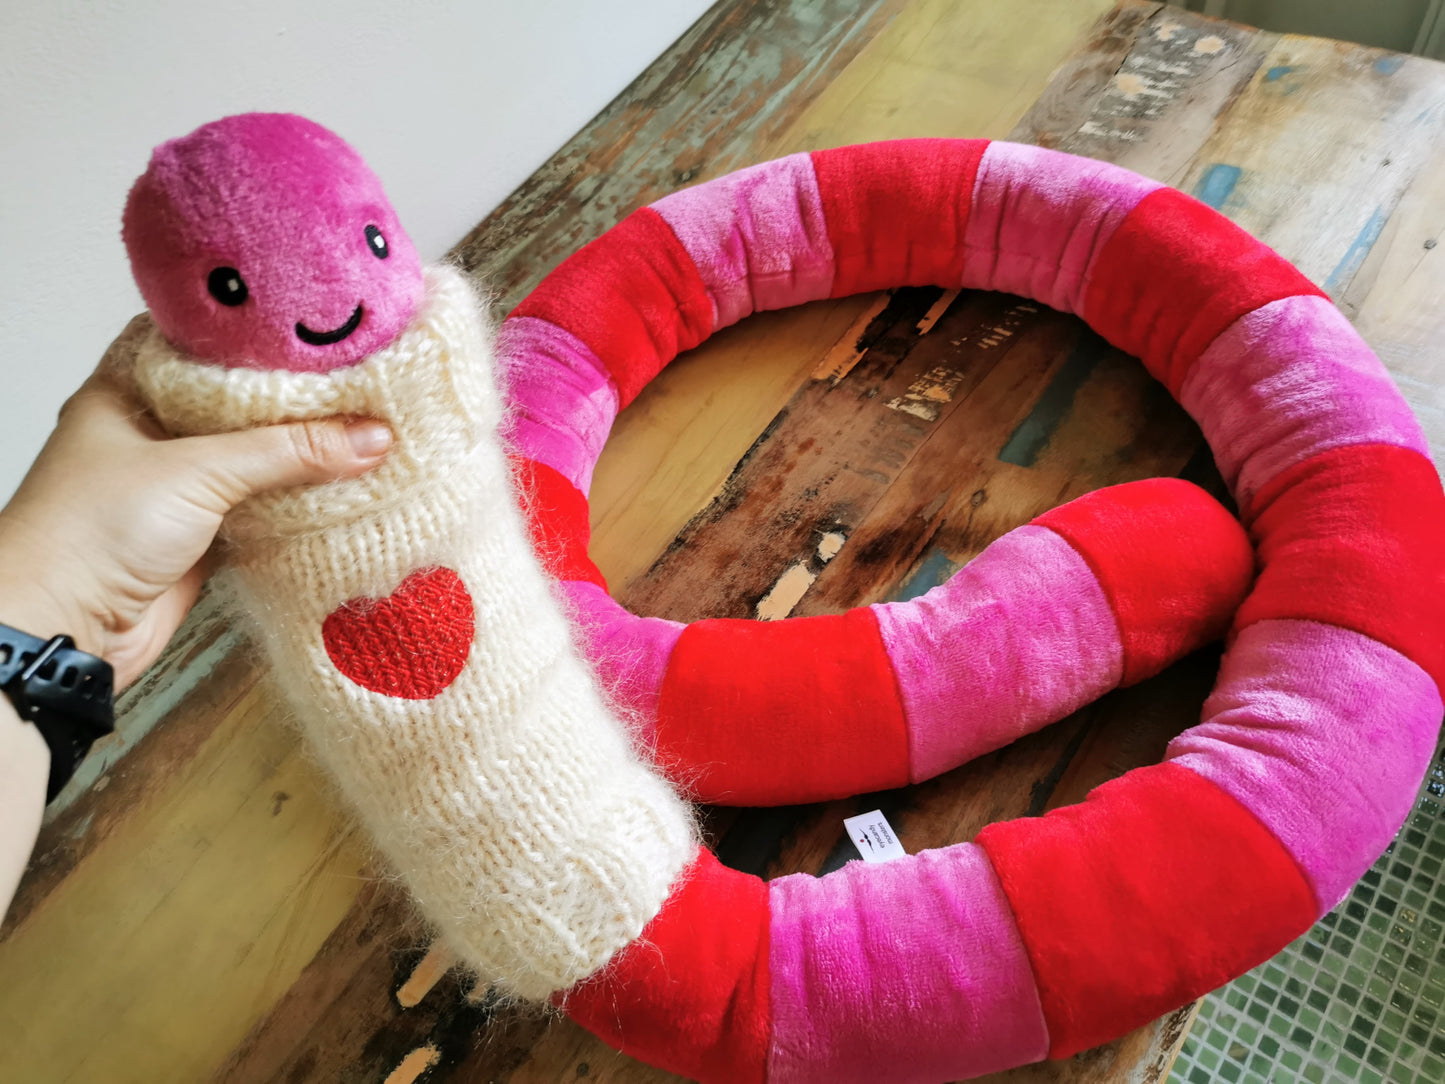 Cuddle Buddy Extraordinaire: The Giant Worm Plush in Chic Knitted Sweater - 200cm of Pure Fun!